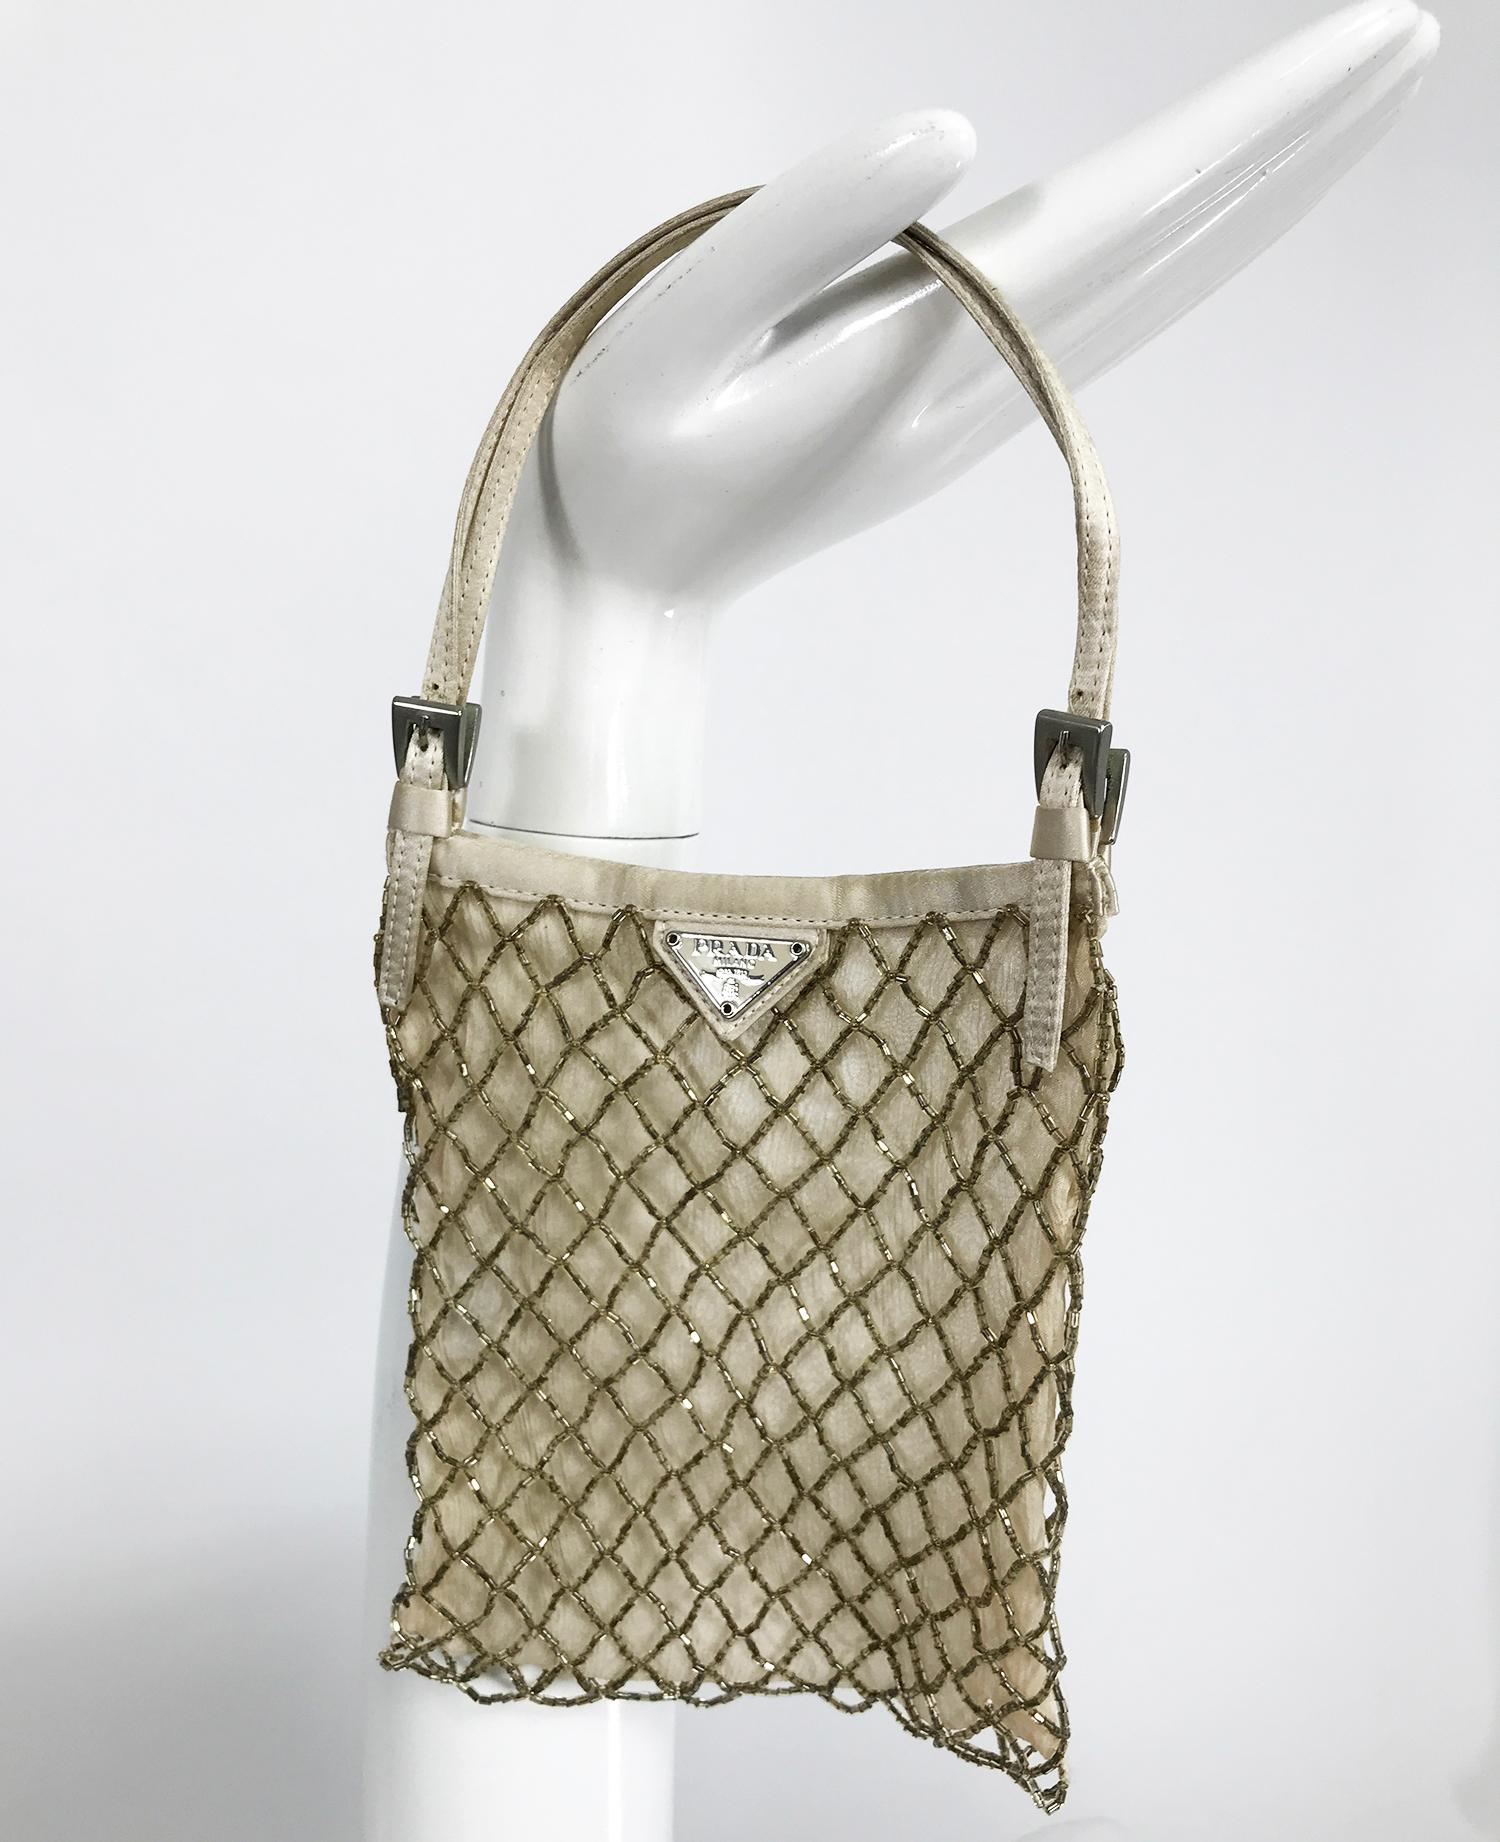 Prada gold beaded, silk chiffon lined, mini evening bag. This sweet bag has double off white sating handles with silver hardware. The bag itself is rectangle with a metal Prada logo at the top front. Cris-cross gold glass tube beads form a diamond